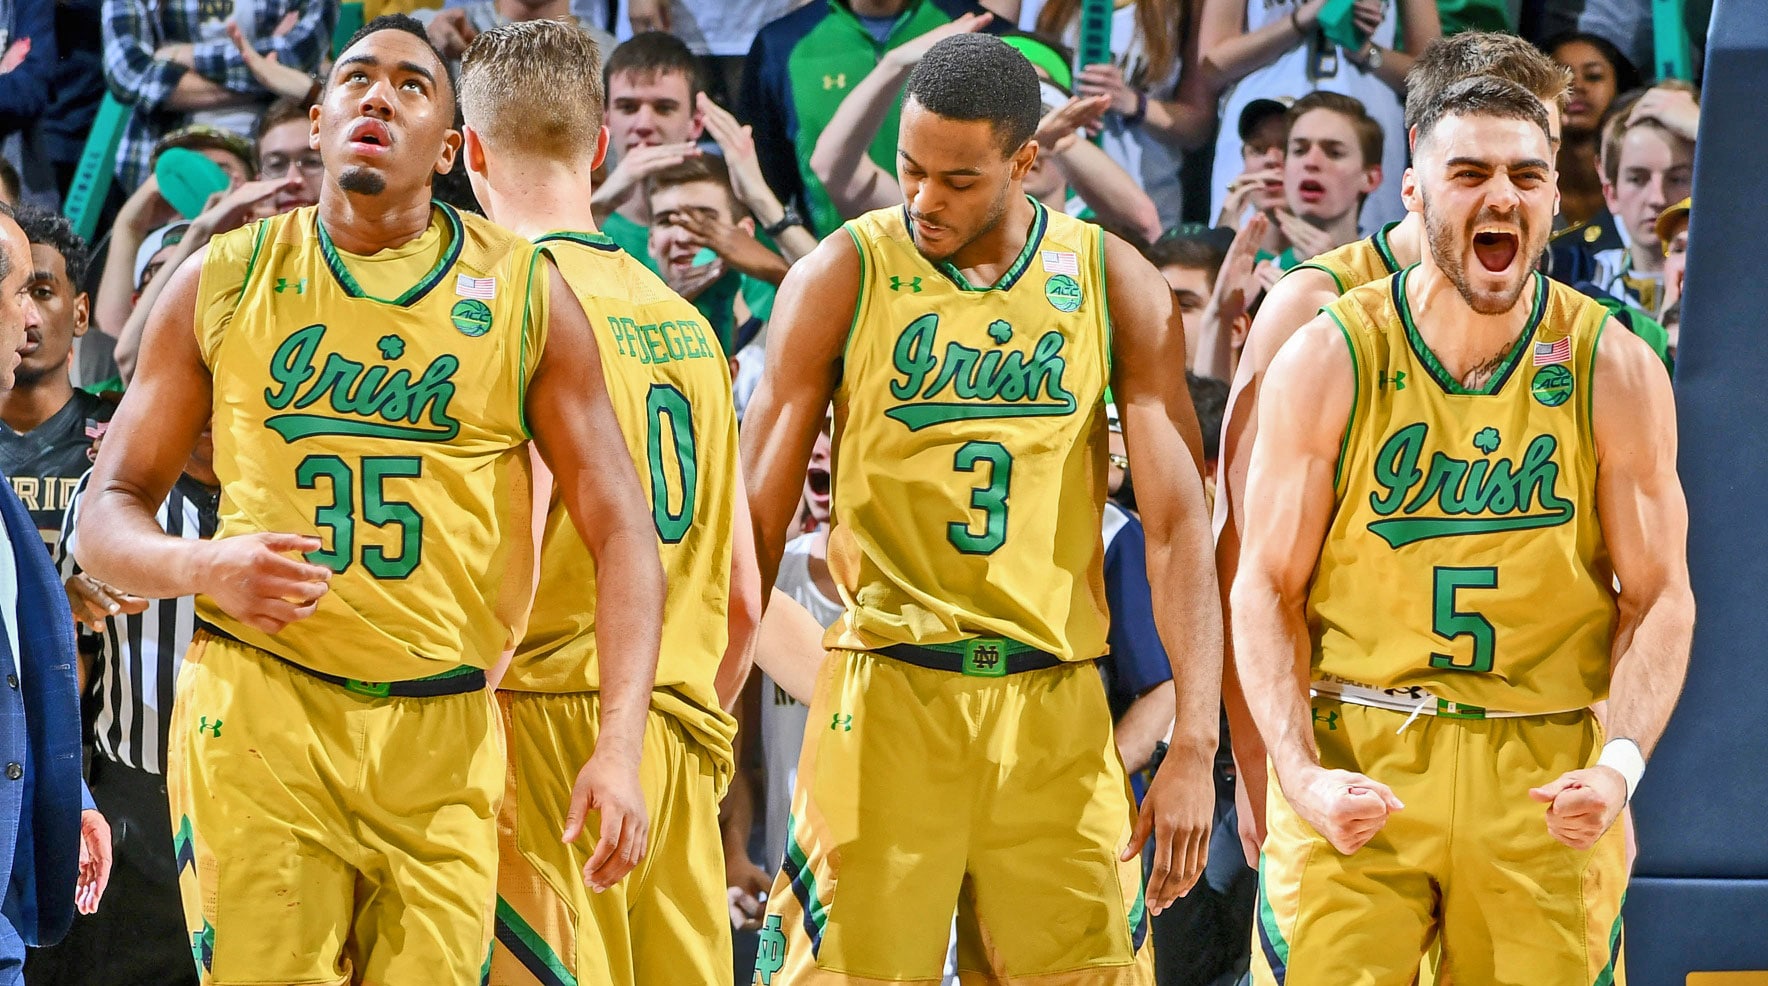 Notre Dame Basketball Report: Irish Back in Top 25! // UHND.com